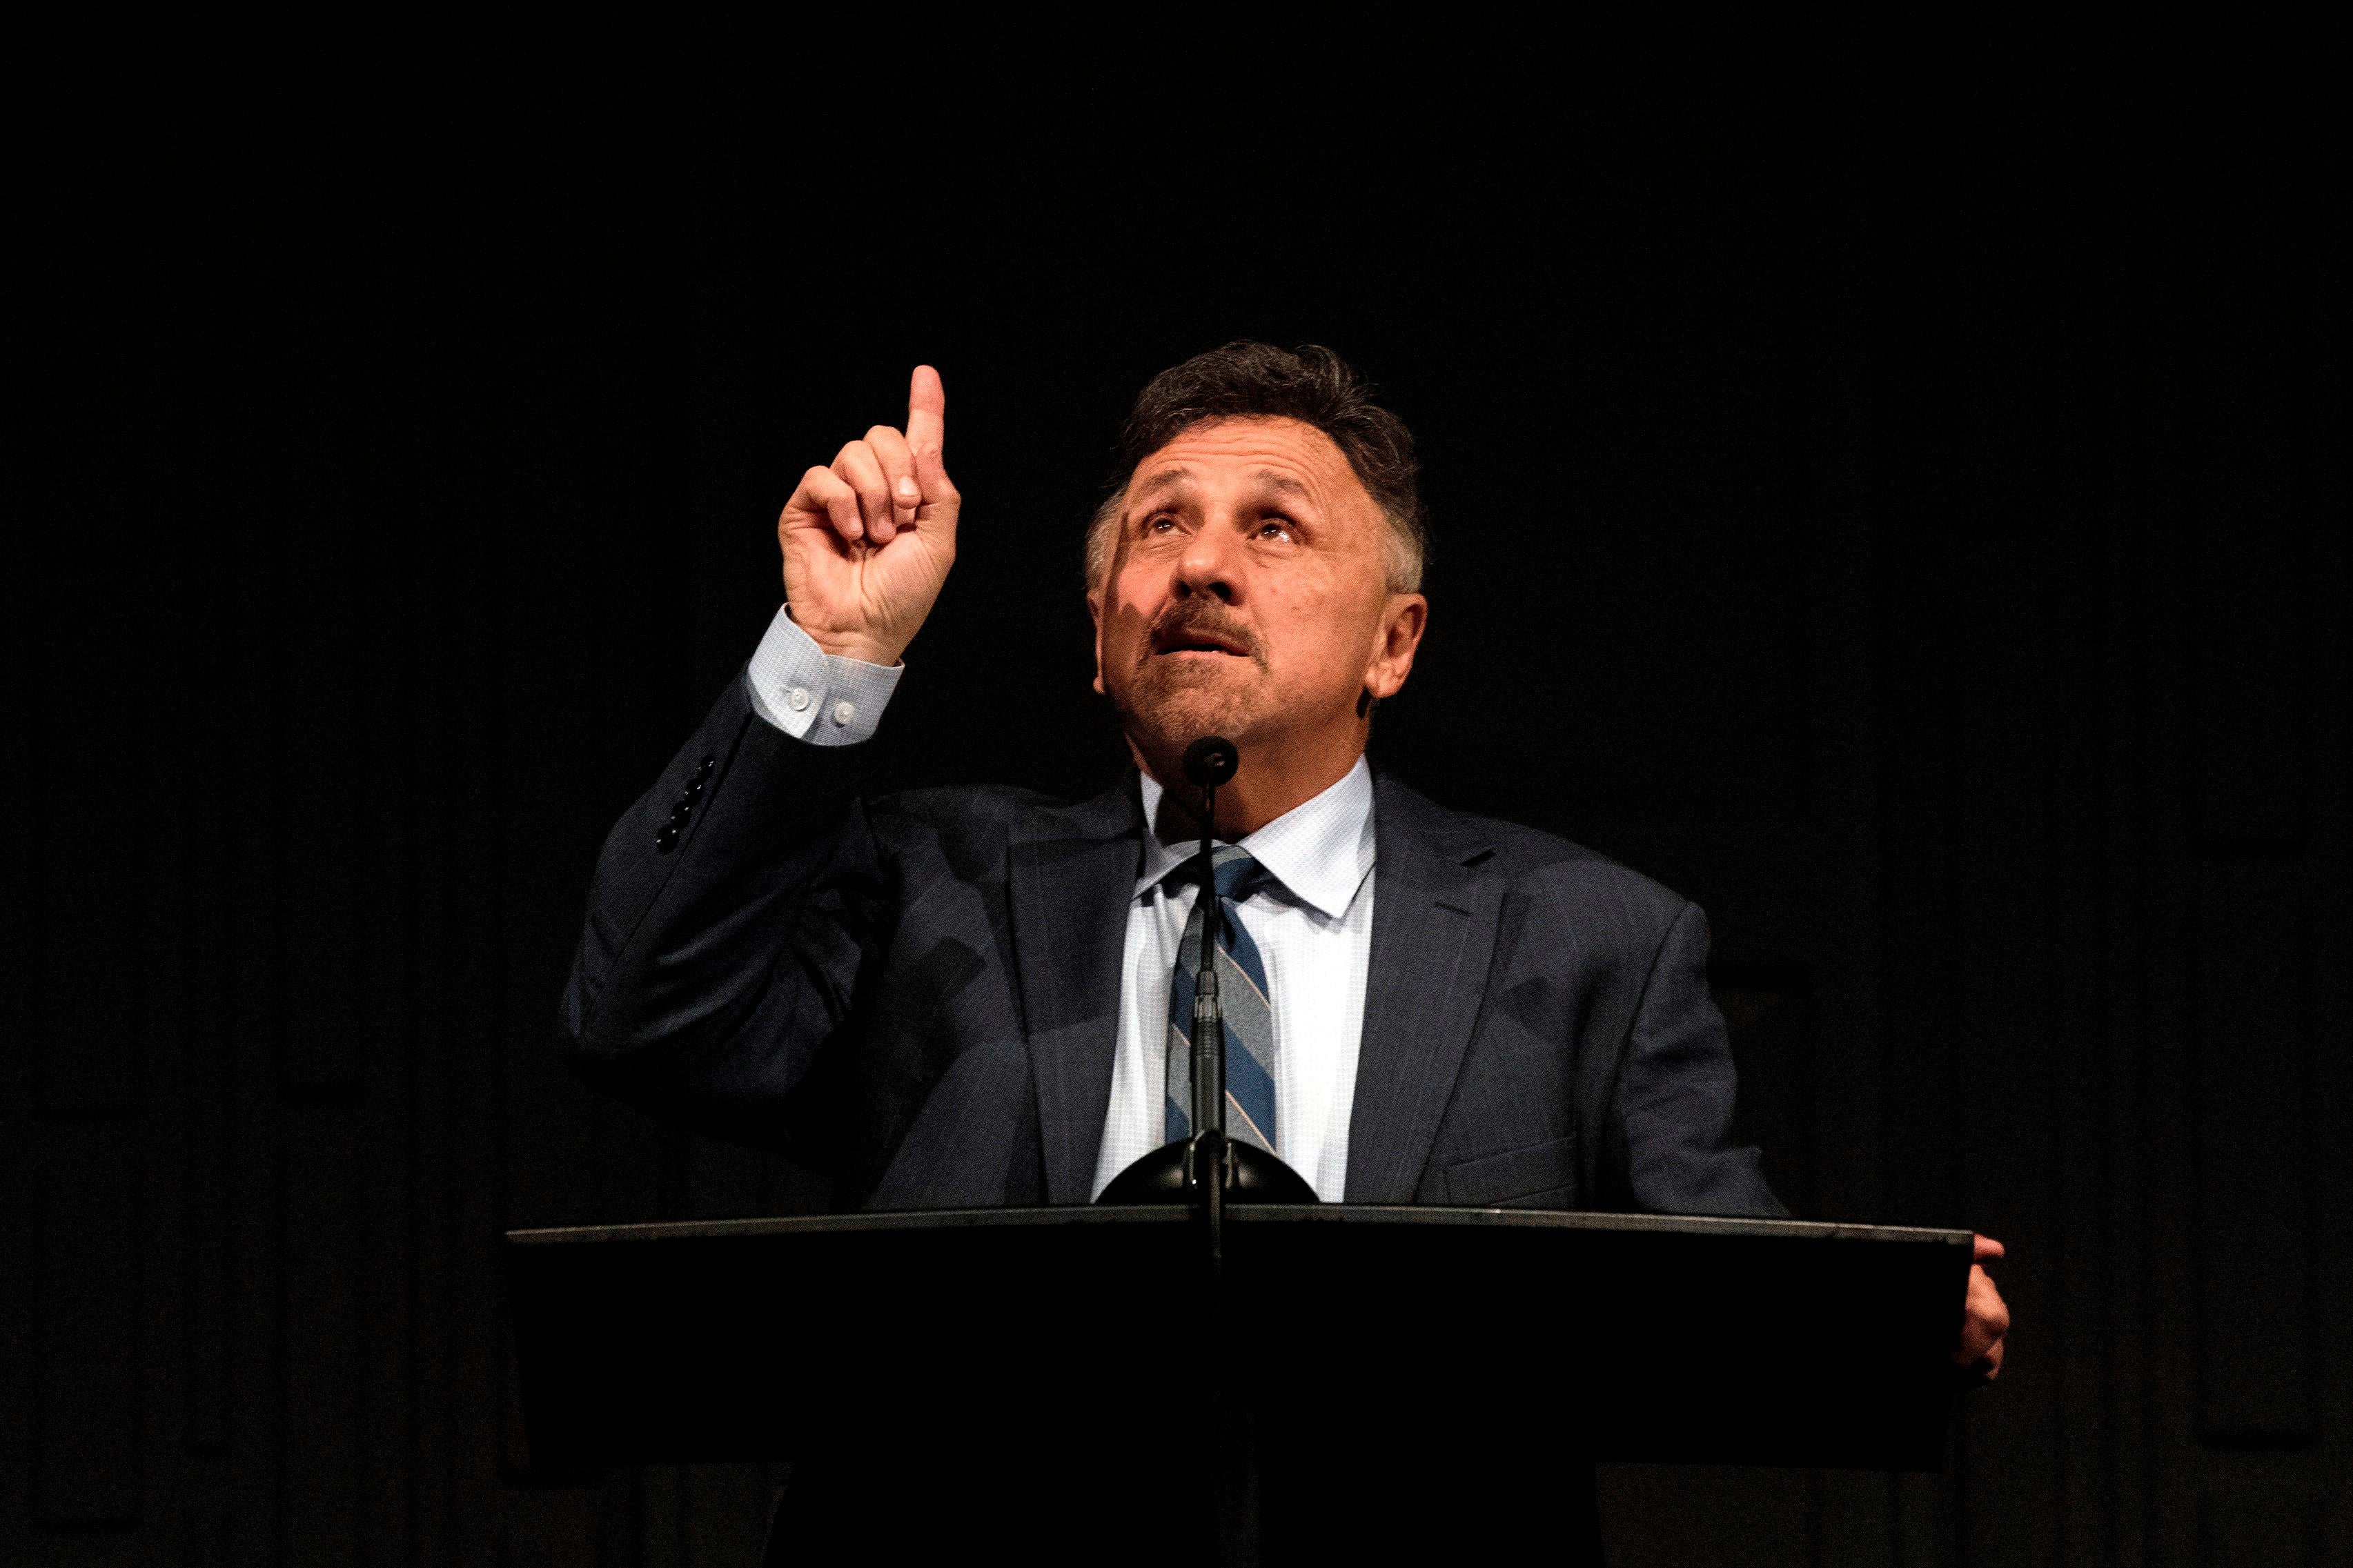 Former Columbine High School principal Frank DeAngelis has gone on to counsel the growing numbers of principals whose schools have also been attacked as the scourge of shootings continues across America